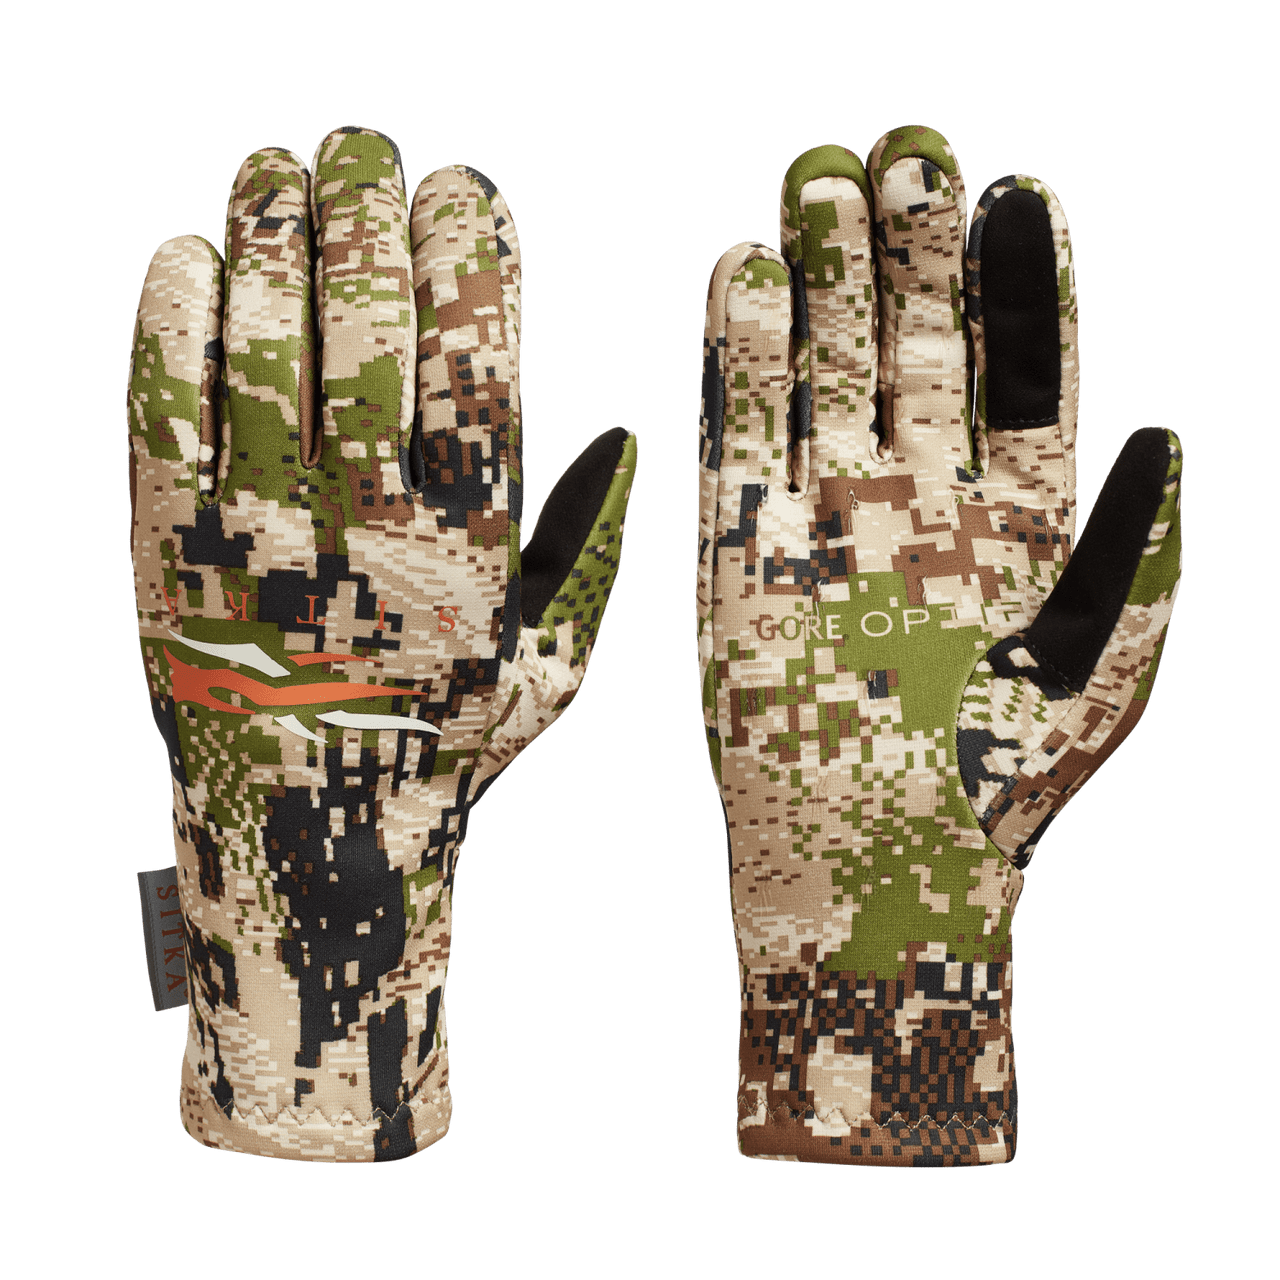 The image depicts a pair of SITKA Traverse Gloves. The gloves have a camouflage pattern. They are made from a polyester fleece fabric that is recycled and stretchy. The gloves have a durable water repellent finish that sheds light precipitation and resists staining. The index finger and thumb have touchscreen compatible Ax Suede, allowing users to operate their smartphones or GPS devices without removing their gloves. The palms of the gloves have a light silicone print that enhances grip. The gloves are designed to be comfortable and versatile, making them suitable for a variety of outdoor activities.